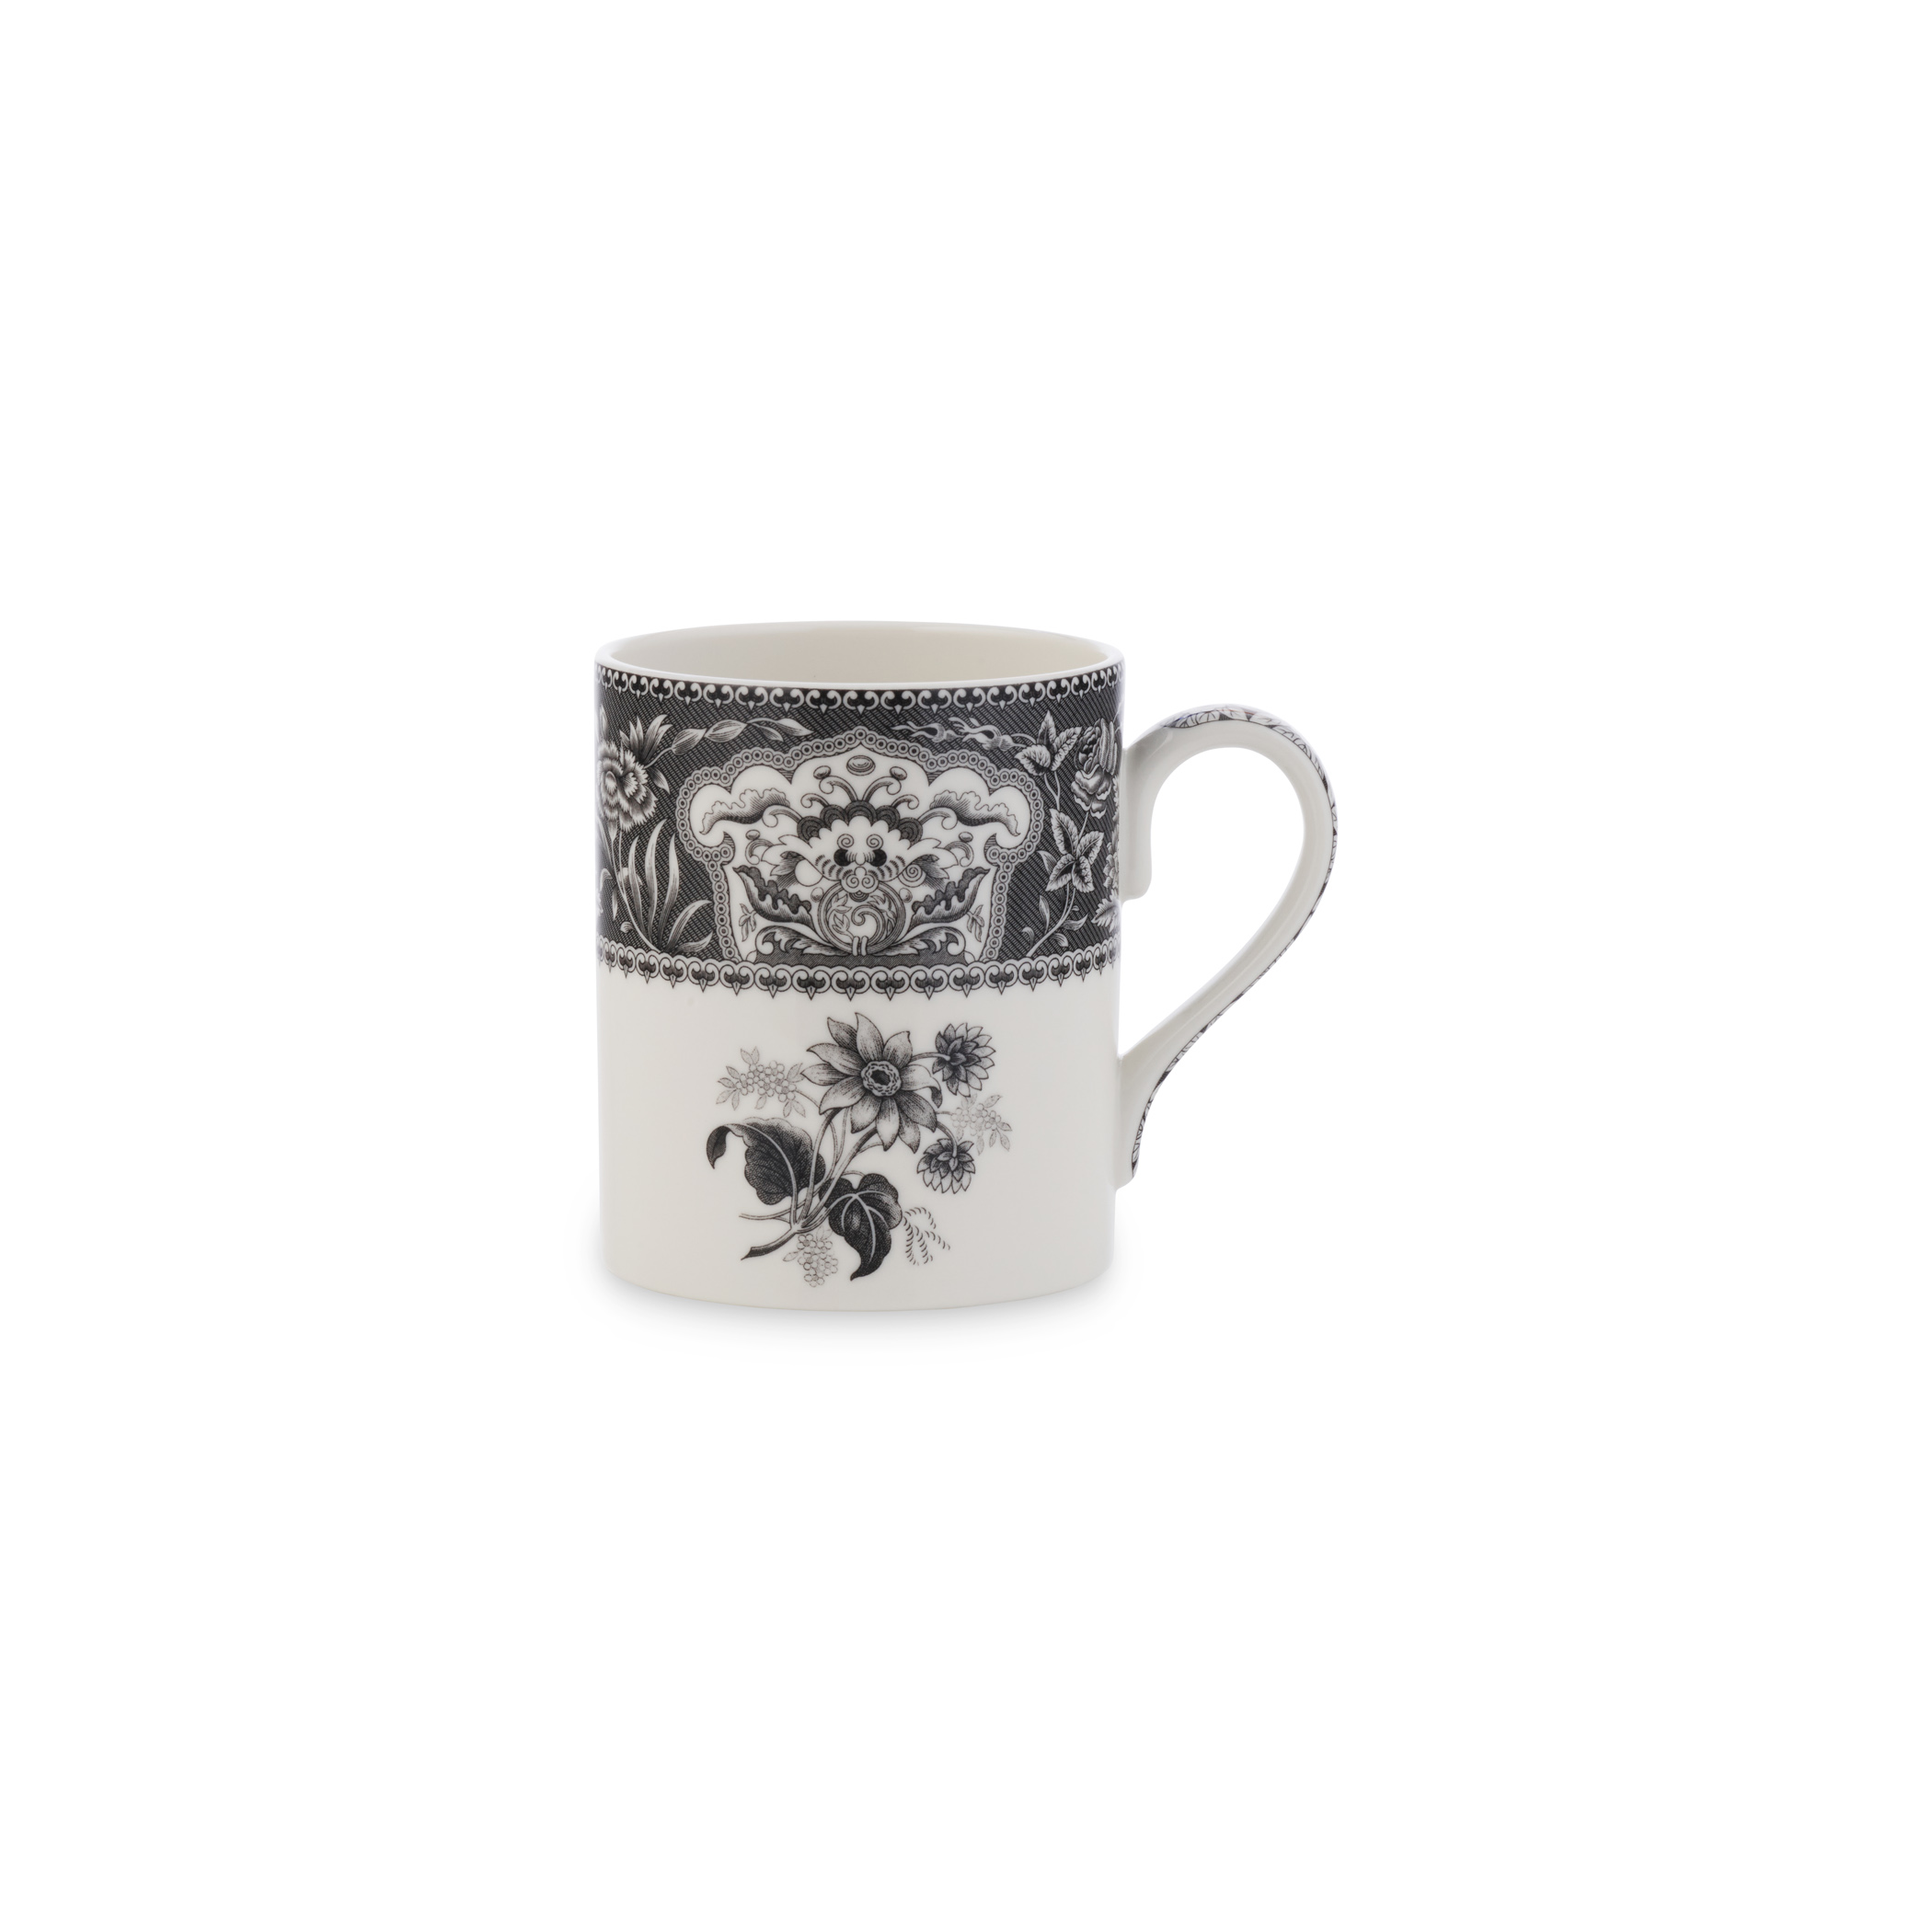 Heritage 16 Ounce Mug (Floral) image number null